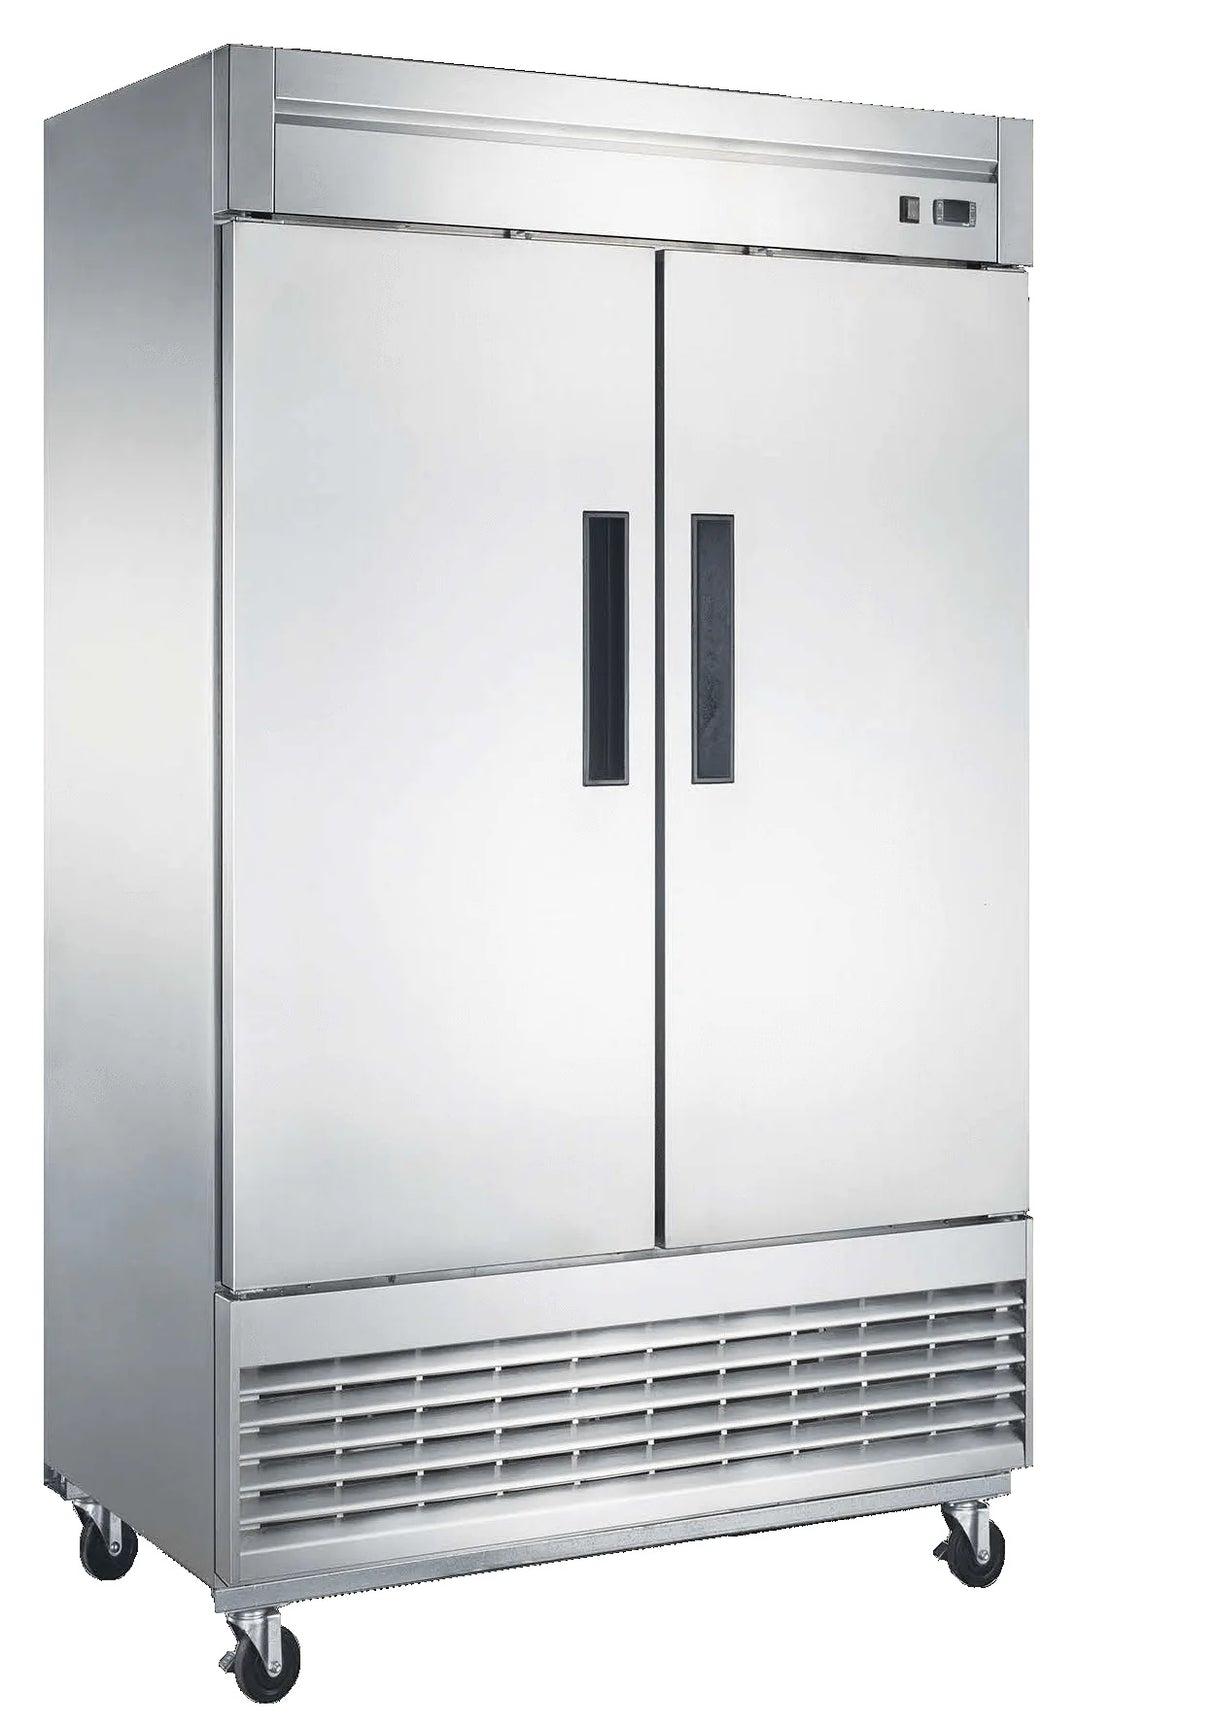 New Air NSR-115-H 41 p3 Refrigerator - 2 Stainless Steel Doors